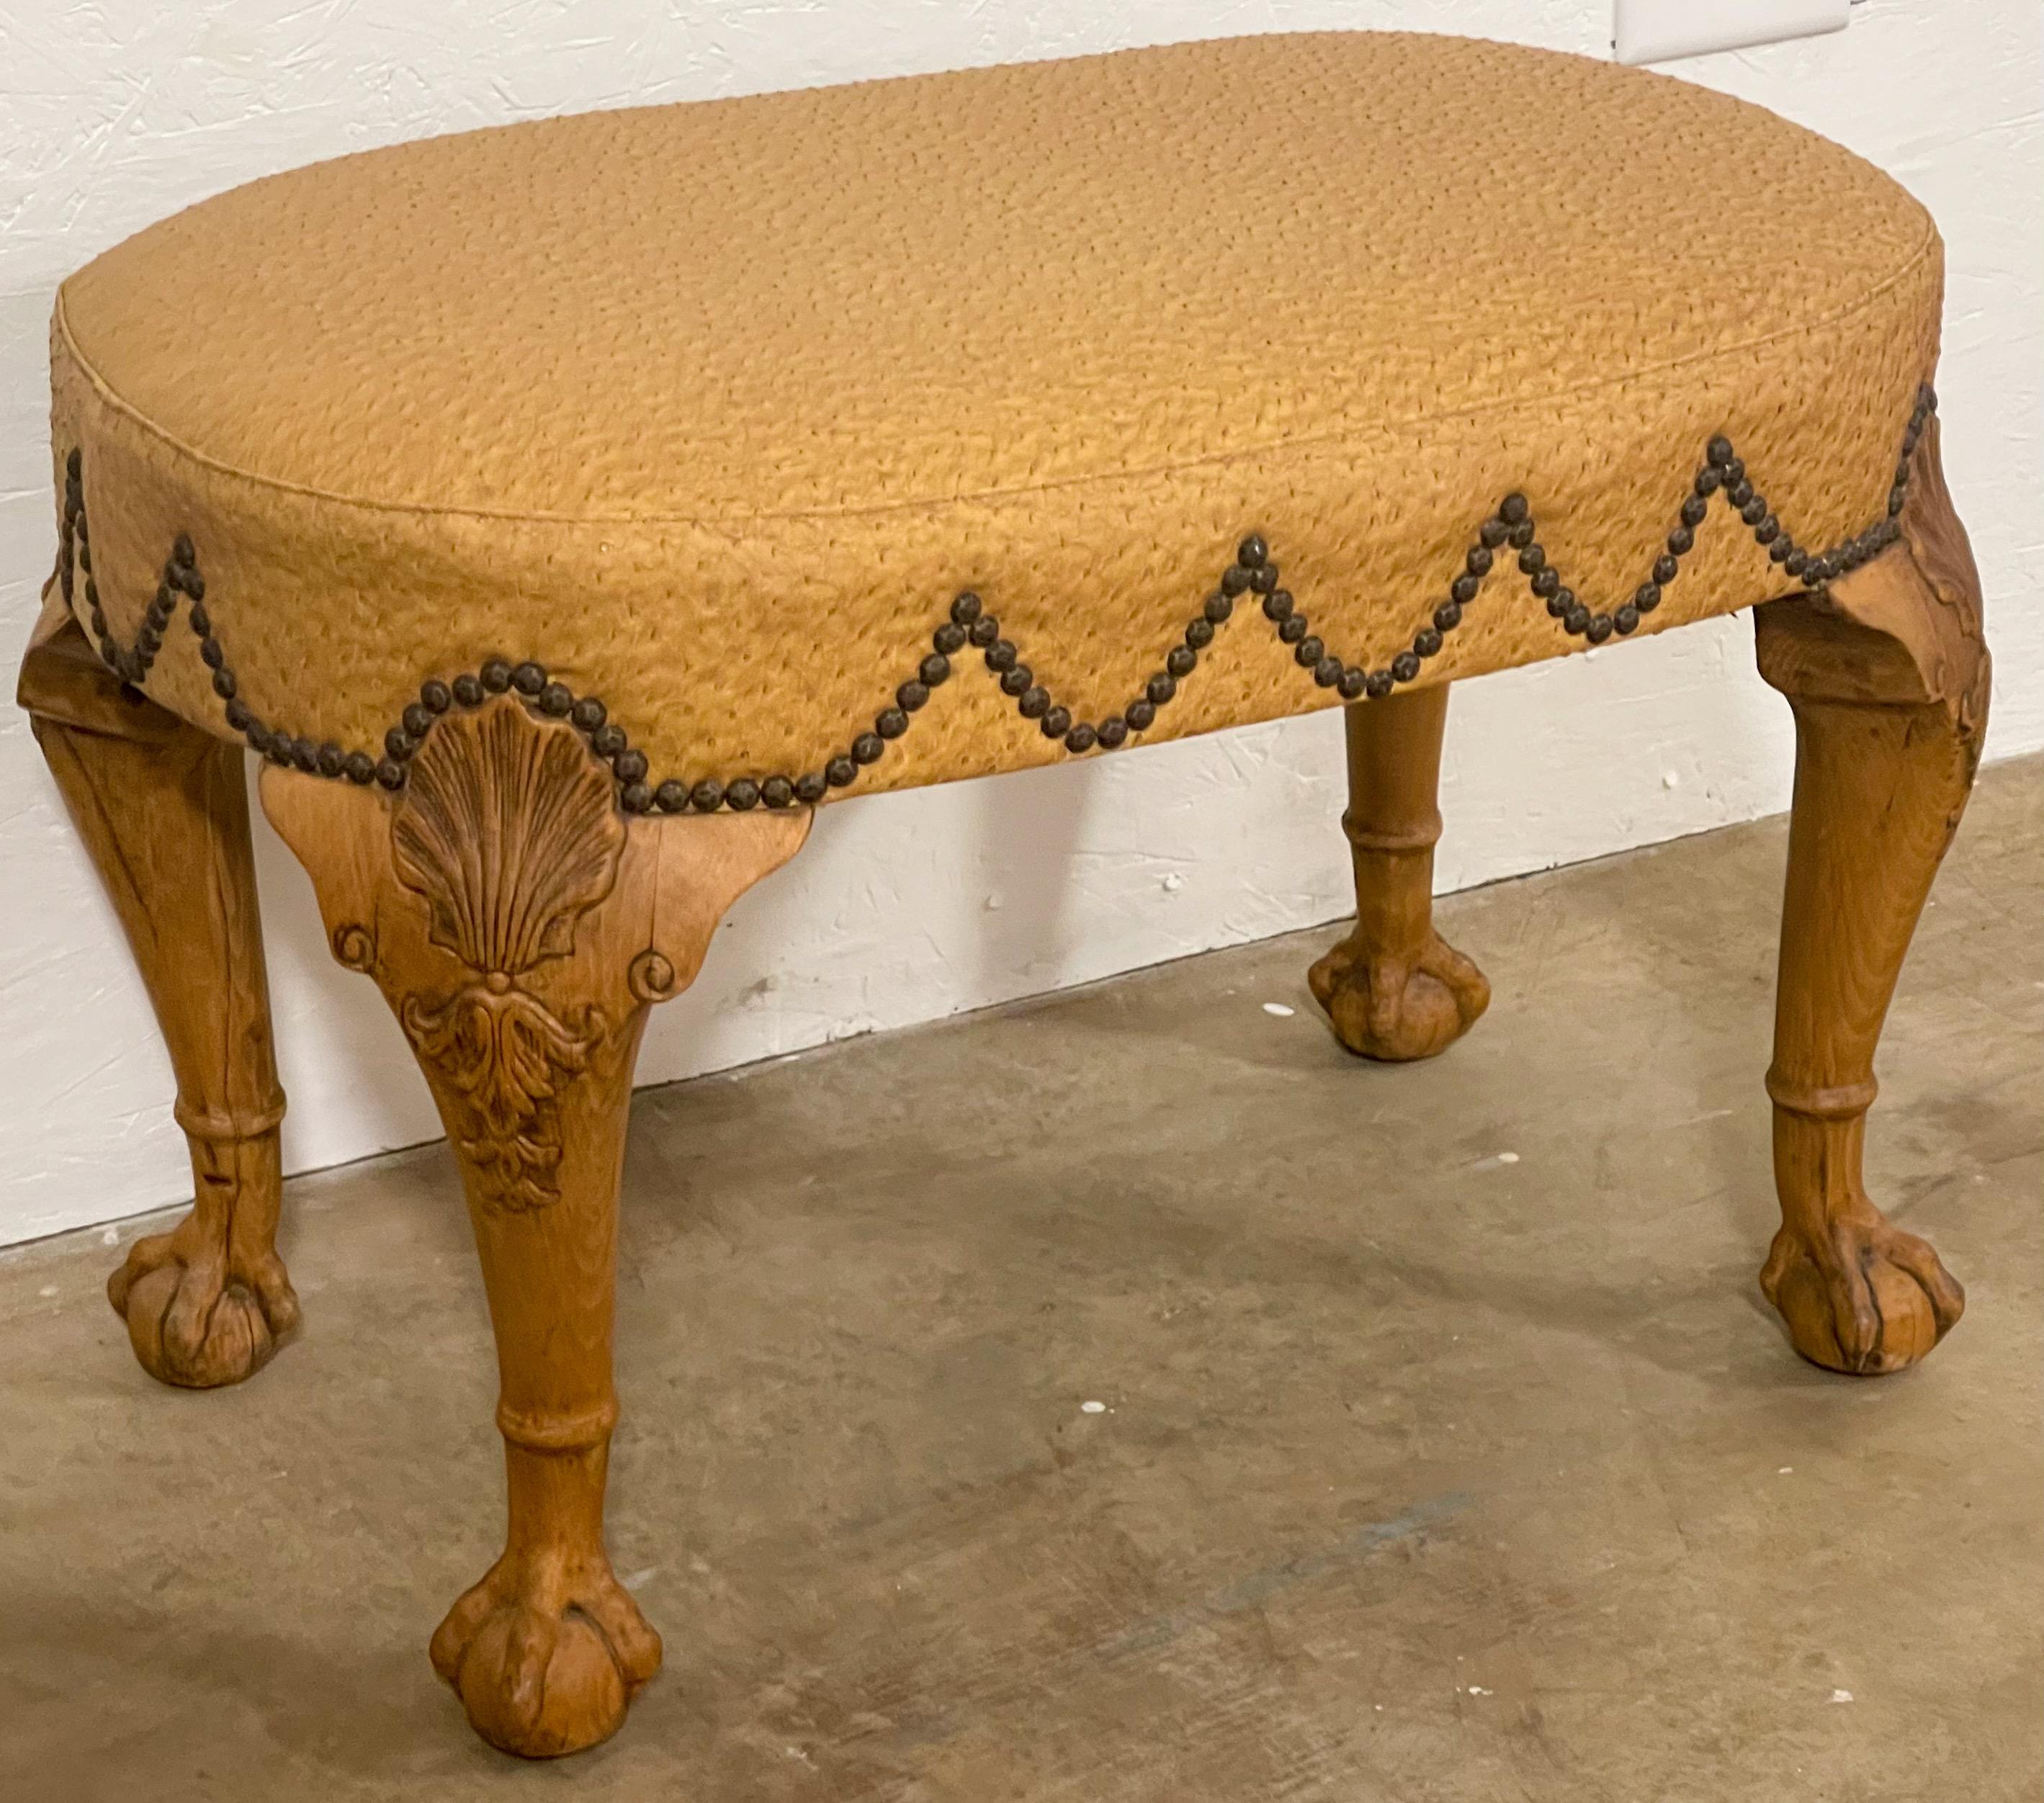 This handsome bench is upholstered in ostrich leather. It is English with Georgian styling. Note the detailed carved with the ball and claw feet! The draping nailheads add a nice touch. It is unmarked.